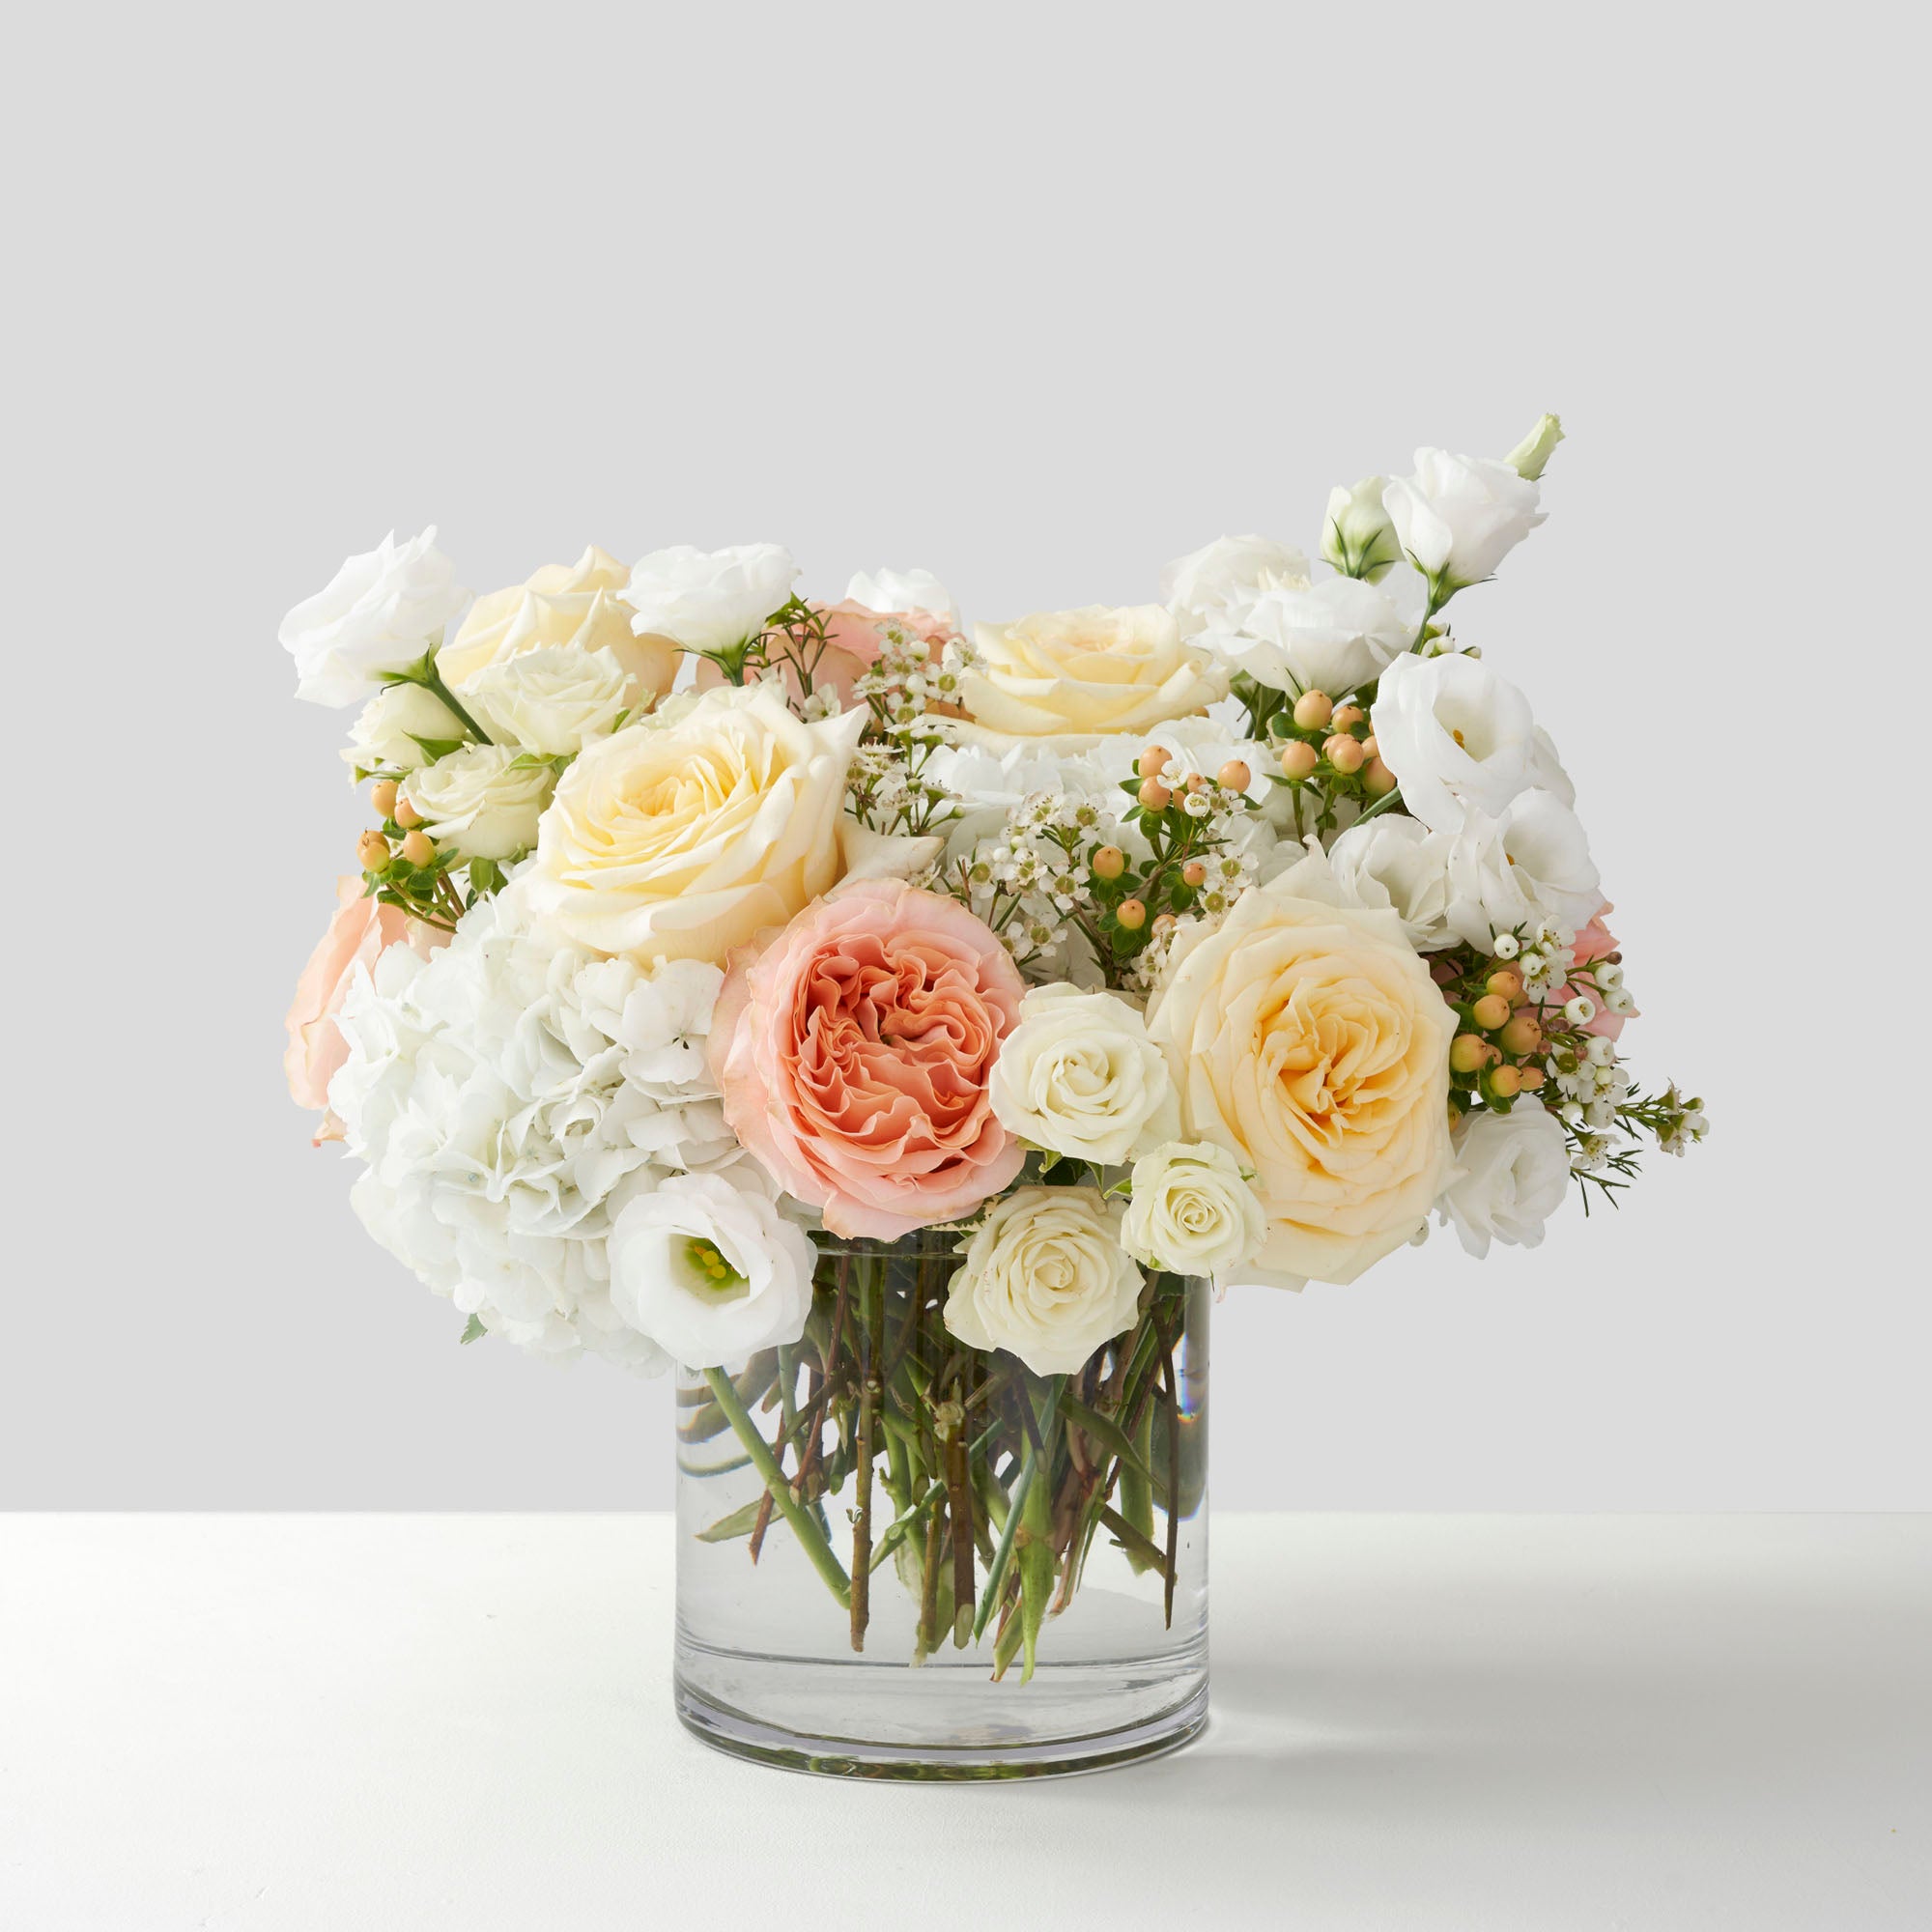 Arrangement of cream and peach garden roses with wax flowers, hydrangean and hypericum berries , on white background.